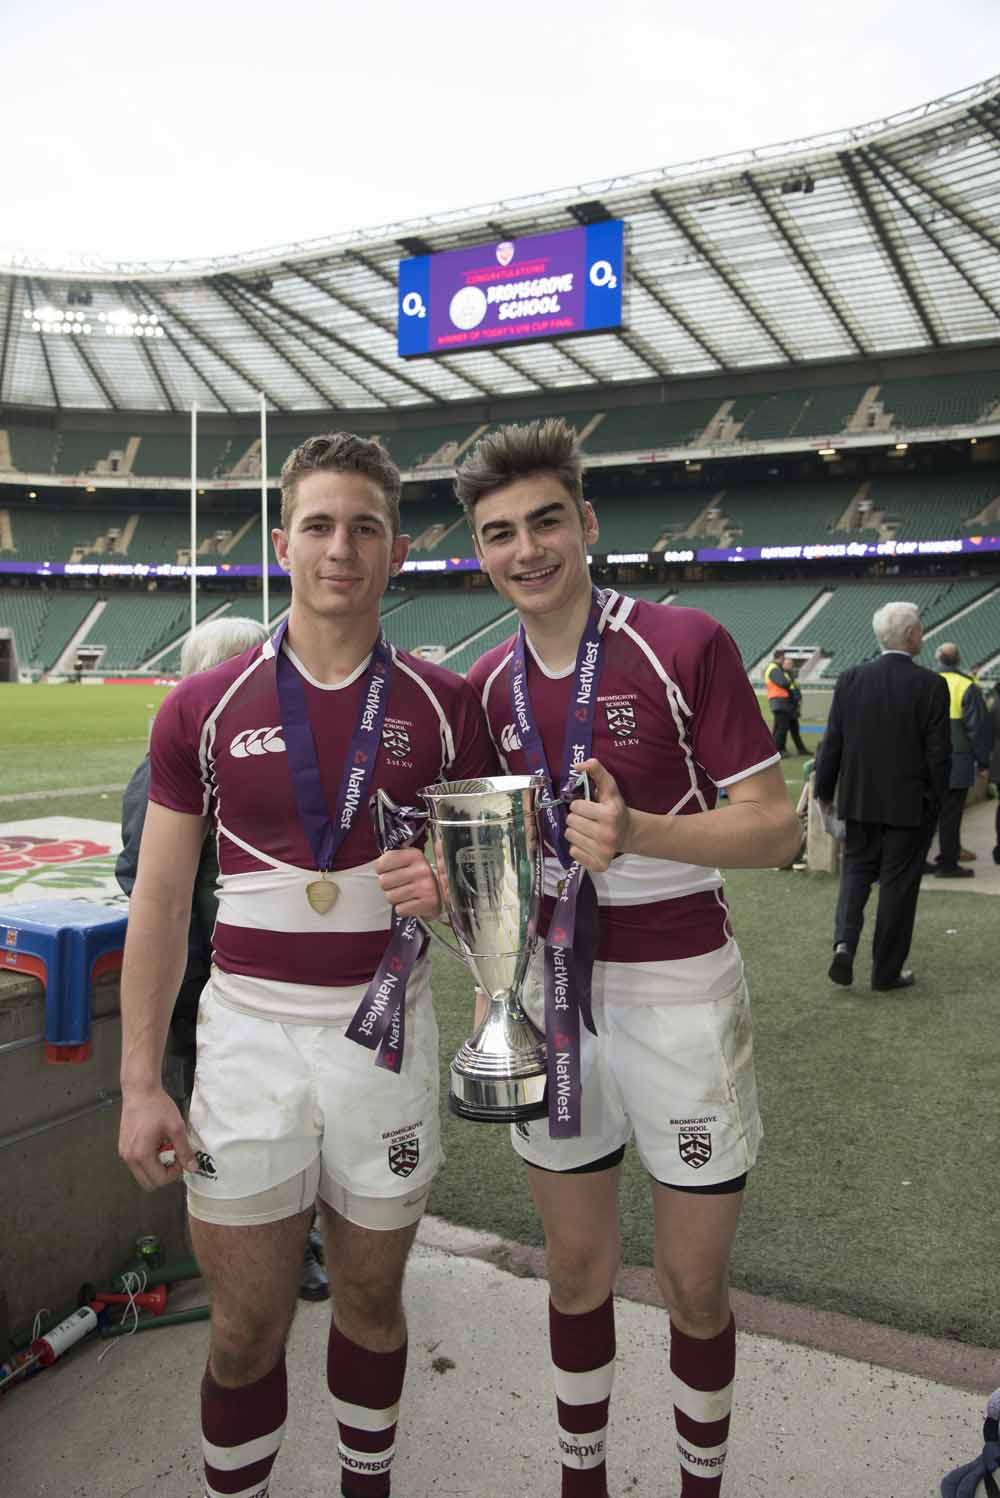 Natwest Schools Cup Final - Bromsgrove crowned champions, 25th March 2015. Photo Credit: Adam Scott